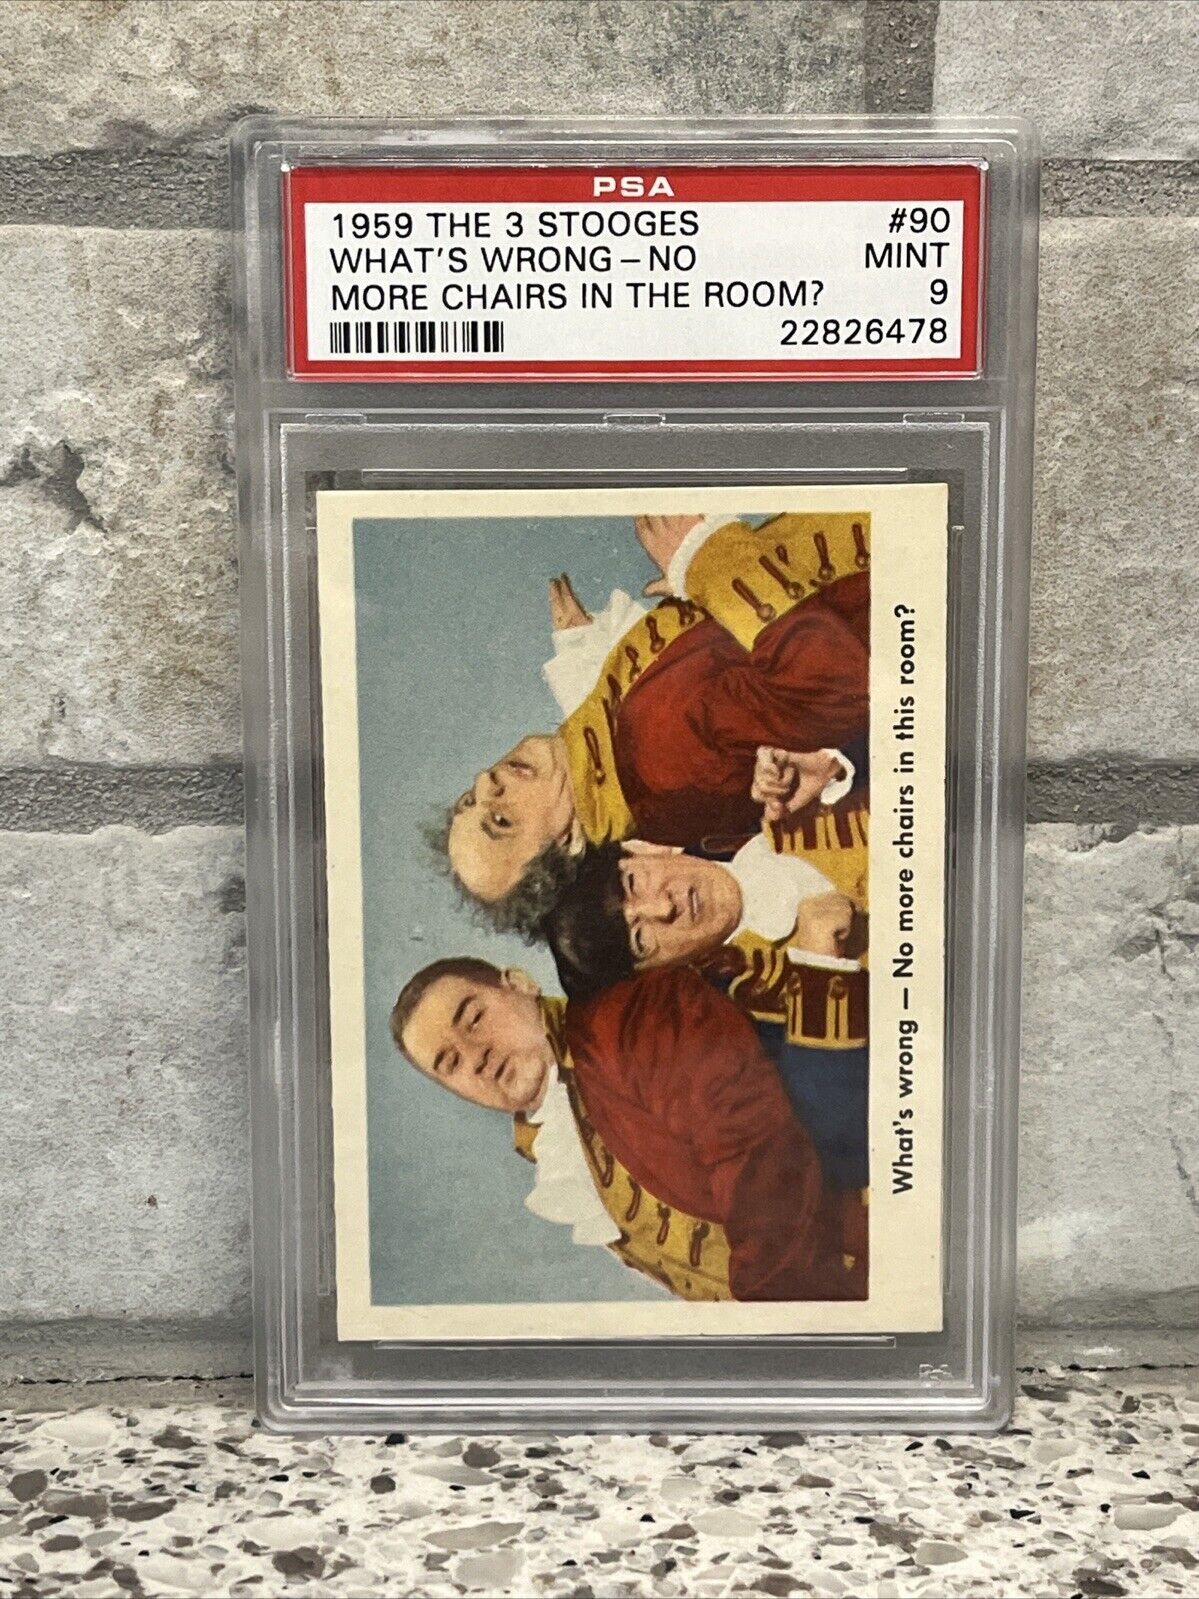 1959 Fleer The 3 Three Stooges #90 What\'s Wrong - No Chairs... PSA 9 MINT